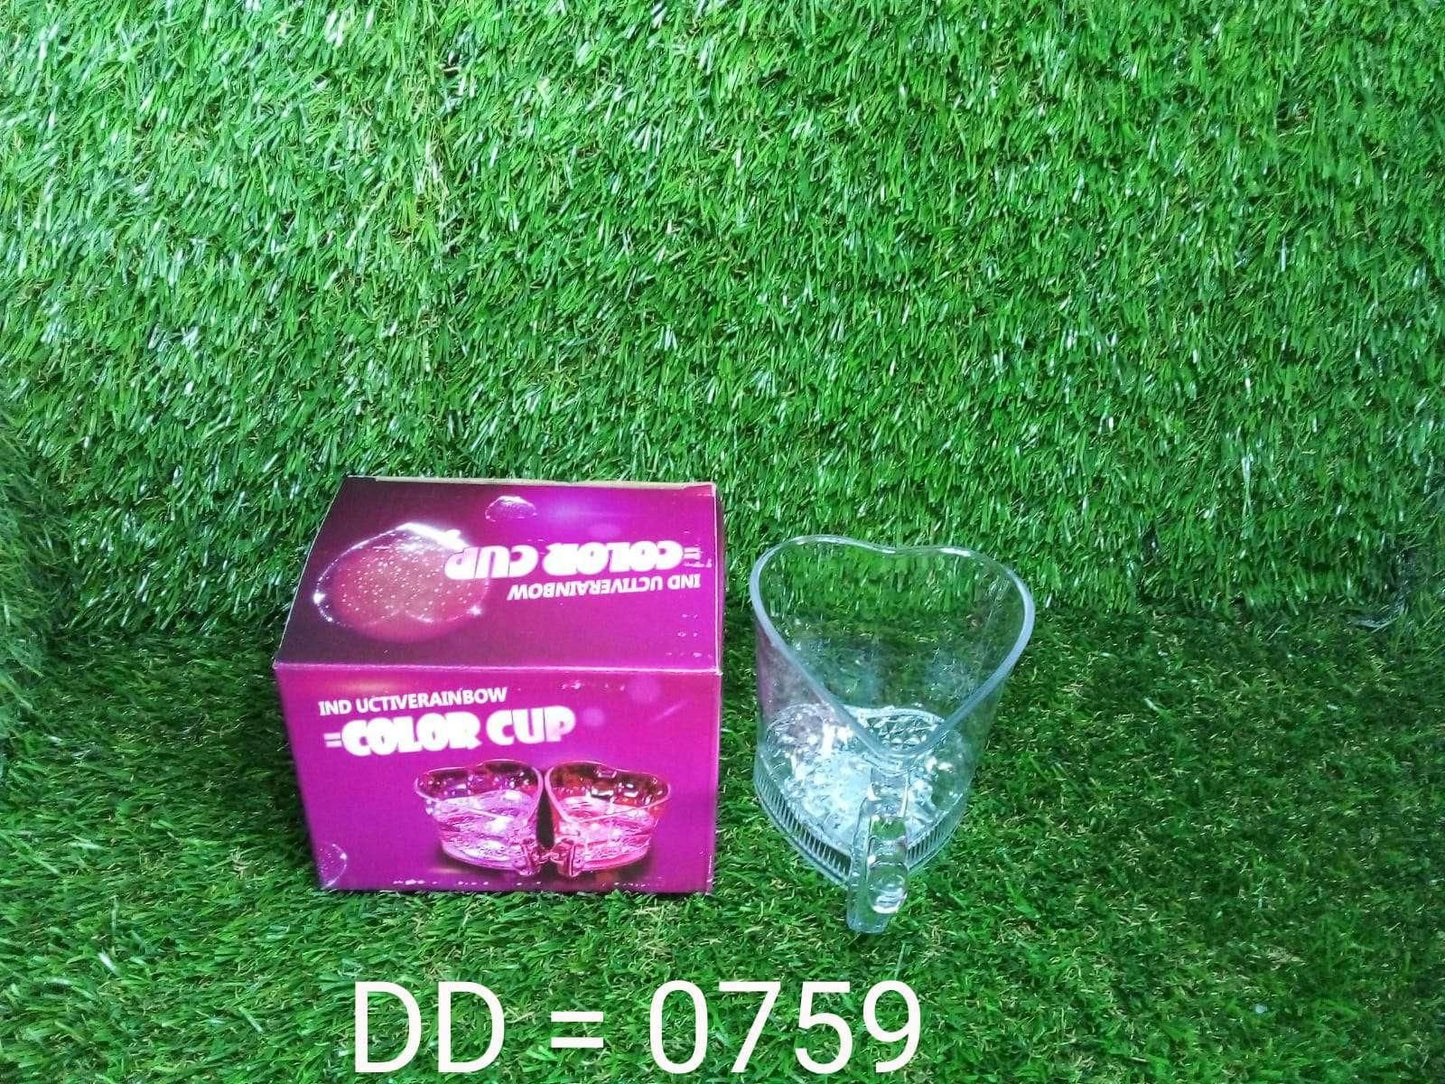 Heart-shaped Activated Blinking Led Glass Cup